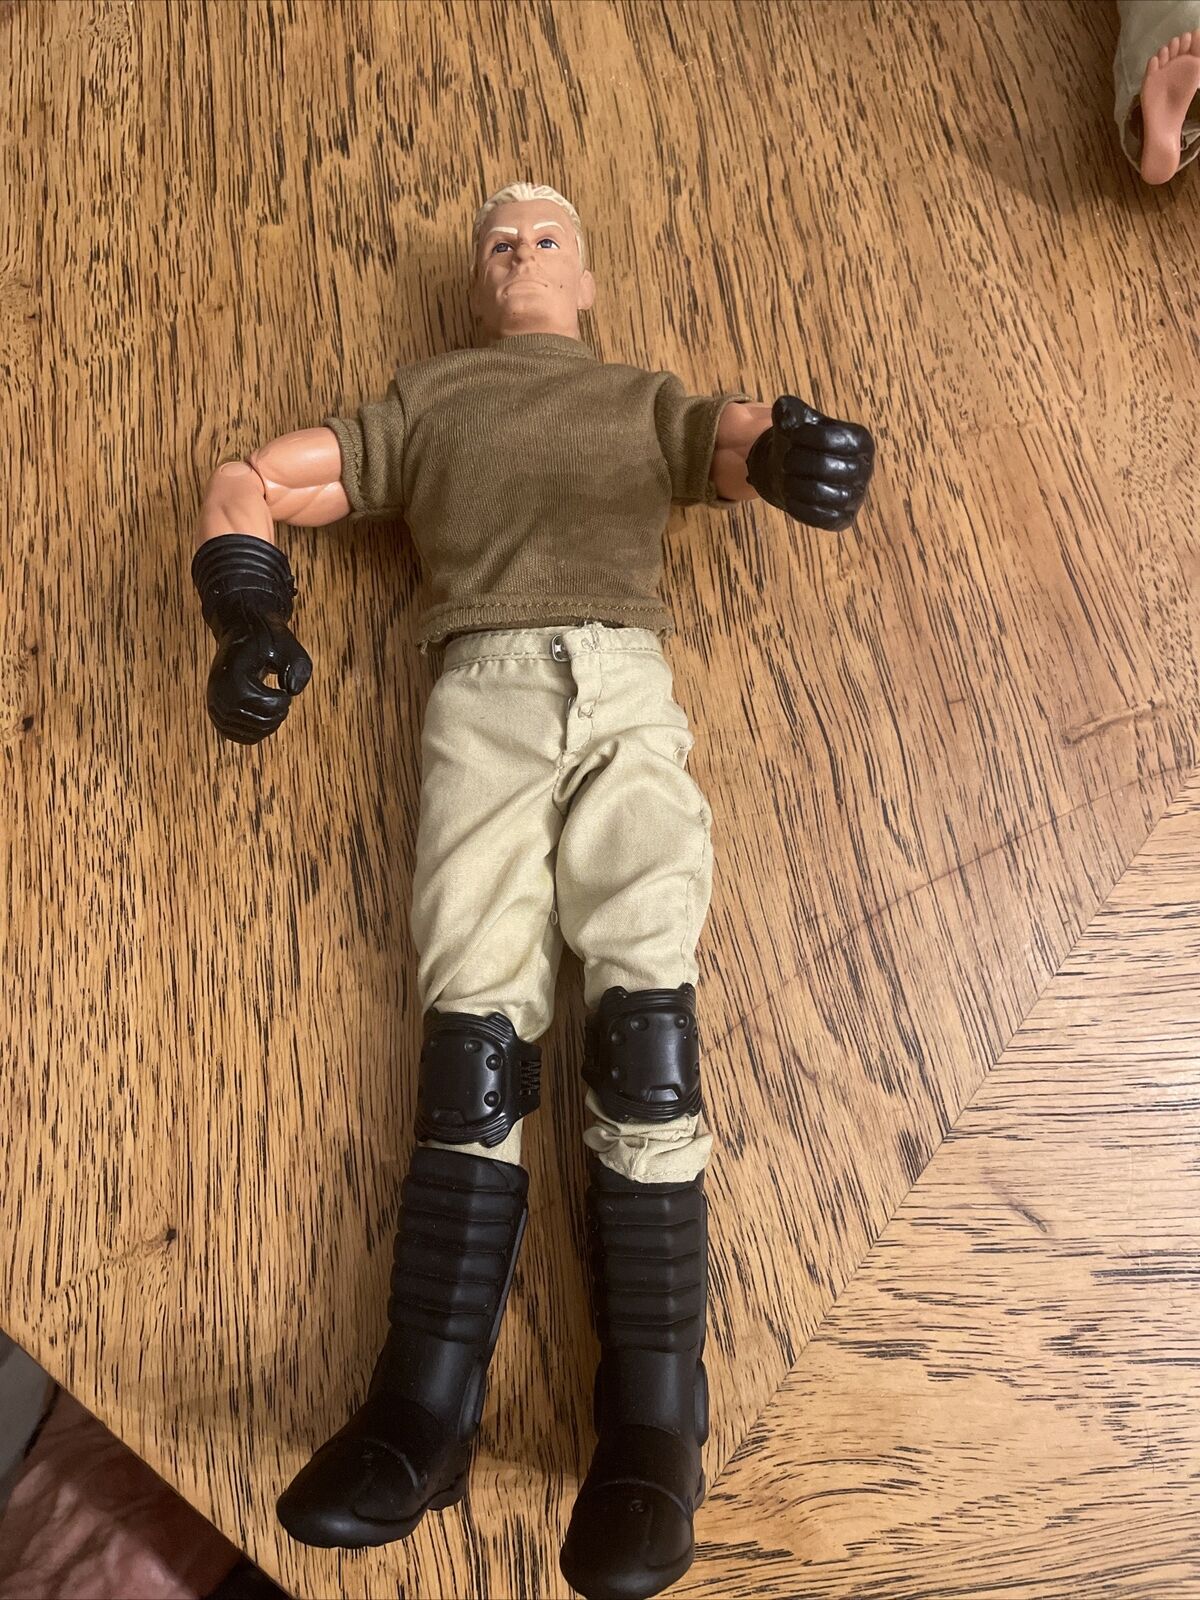 2003 Hasbro Talking GI JOE 12in Action Figure Soft Face Mouth Moves Toy